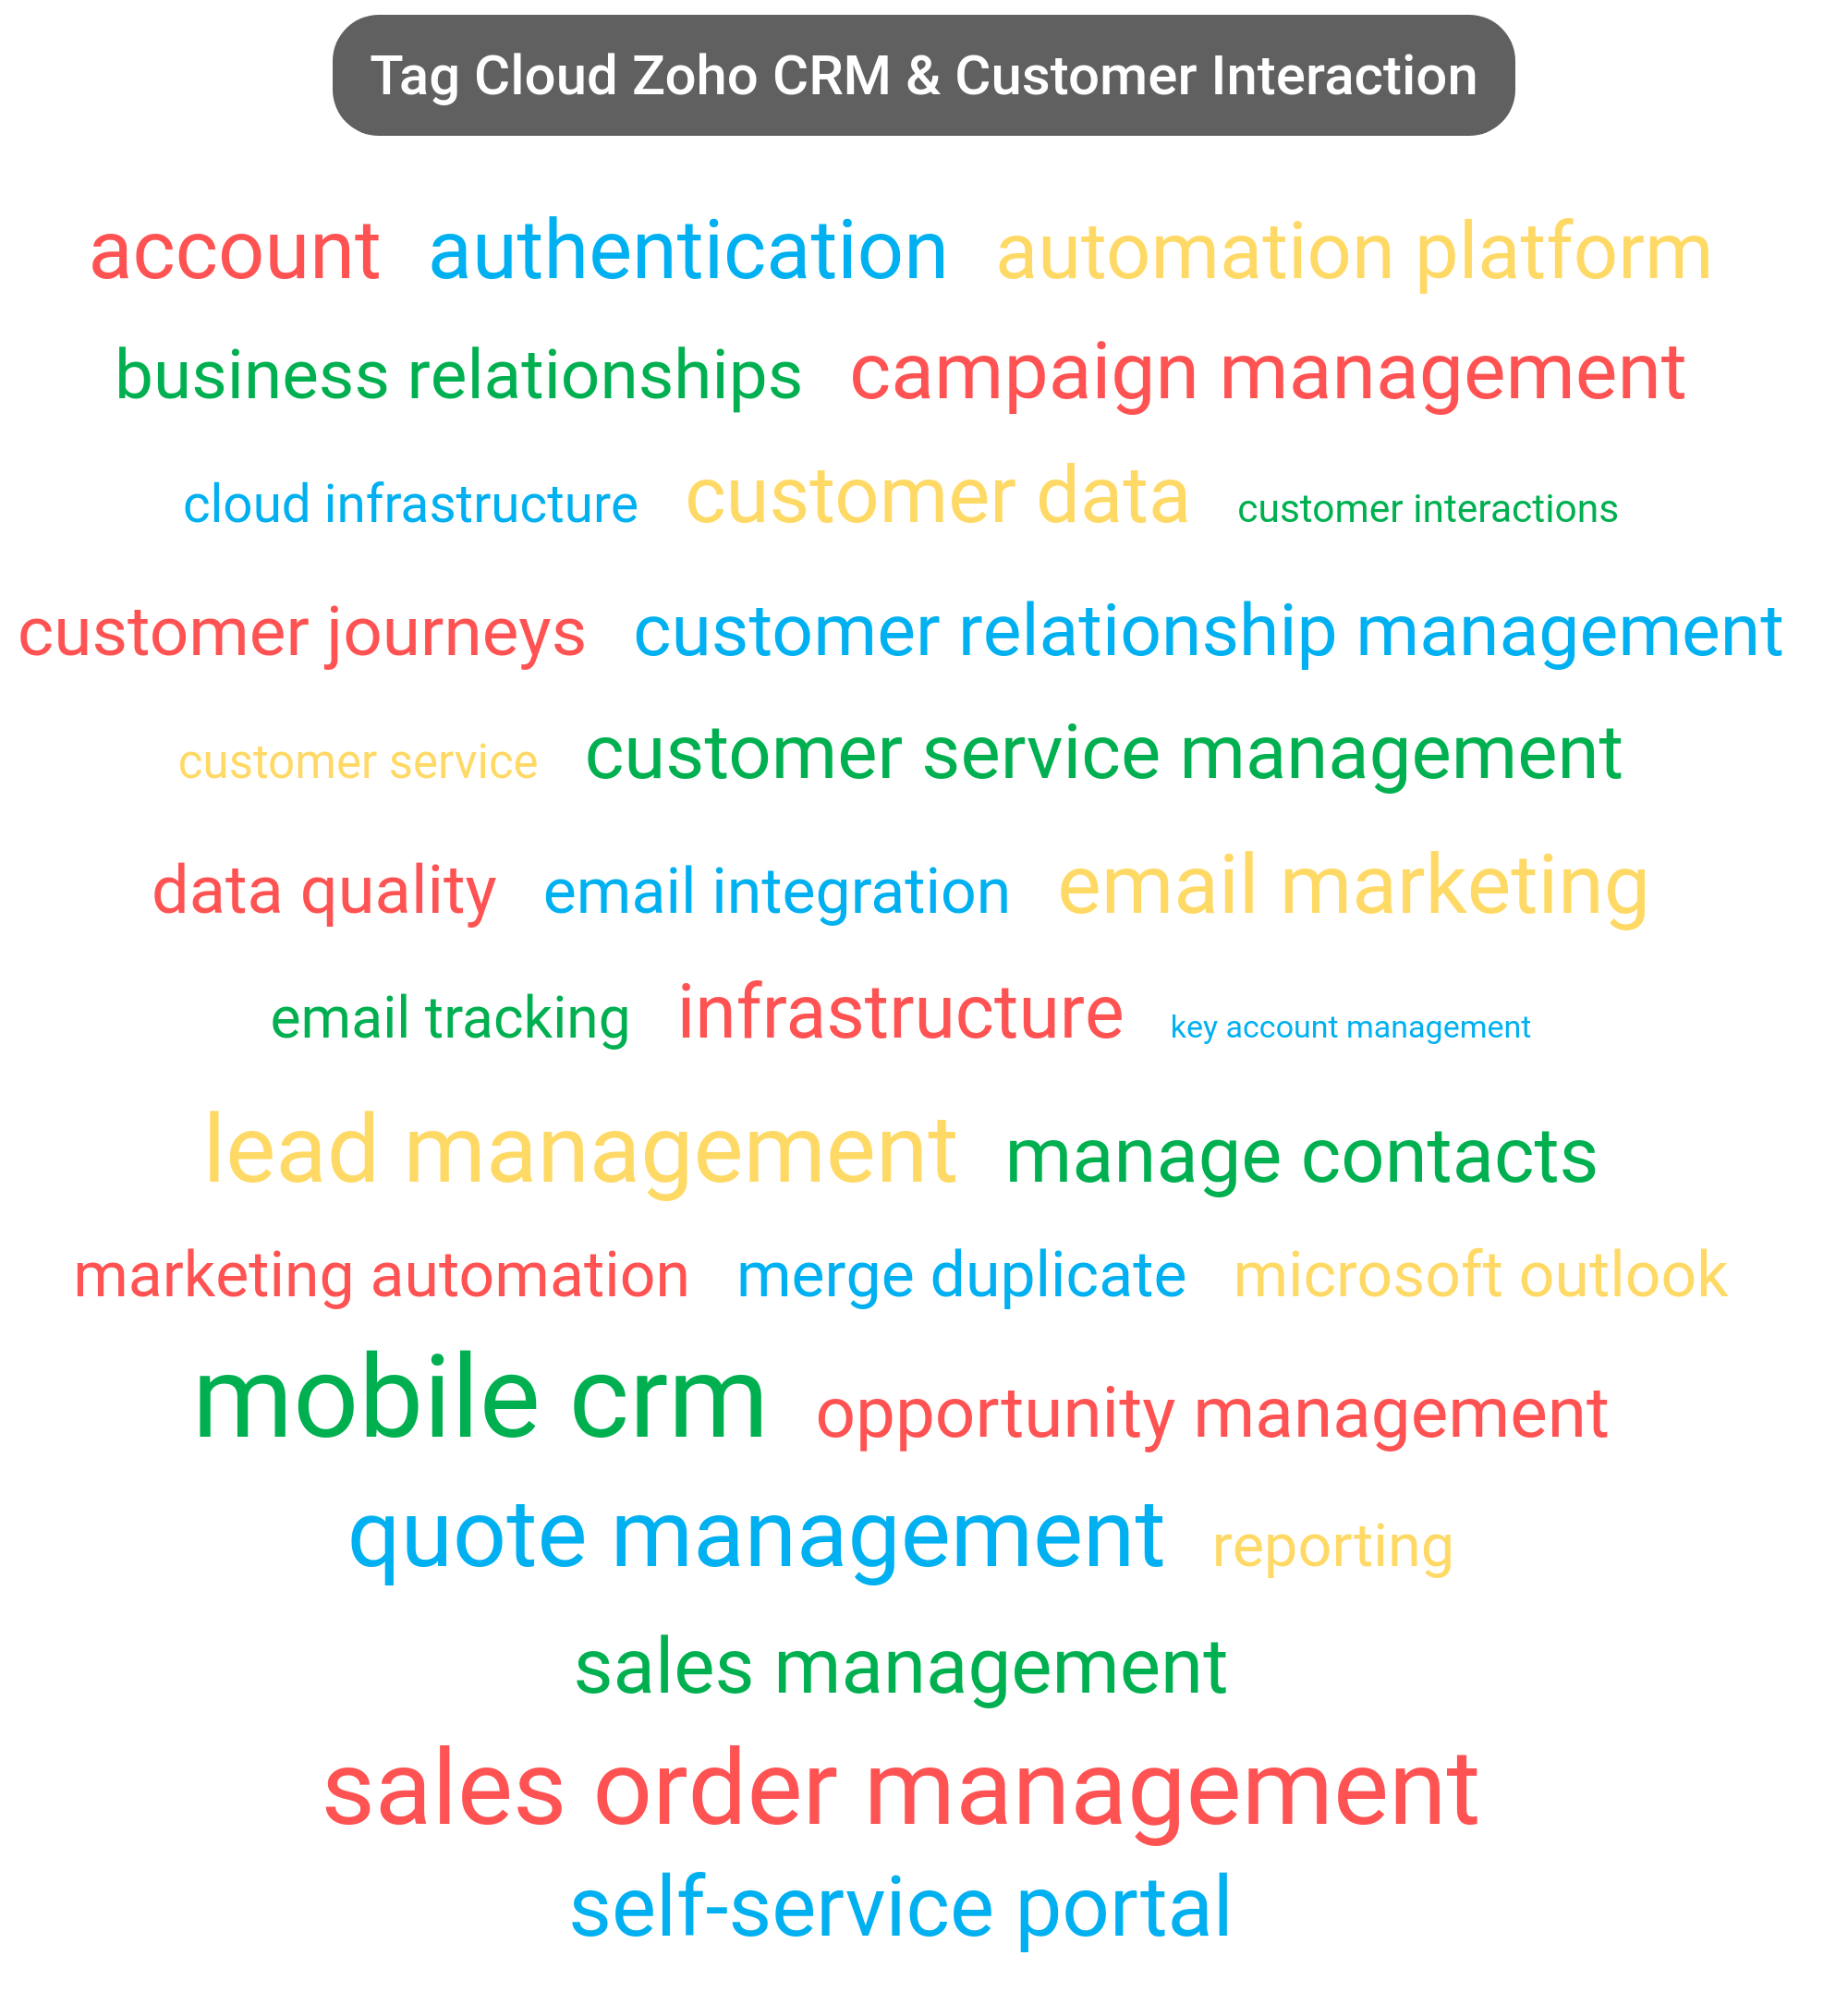 Tag cloud of the Zoho CRM tools.